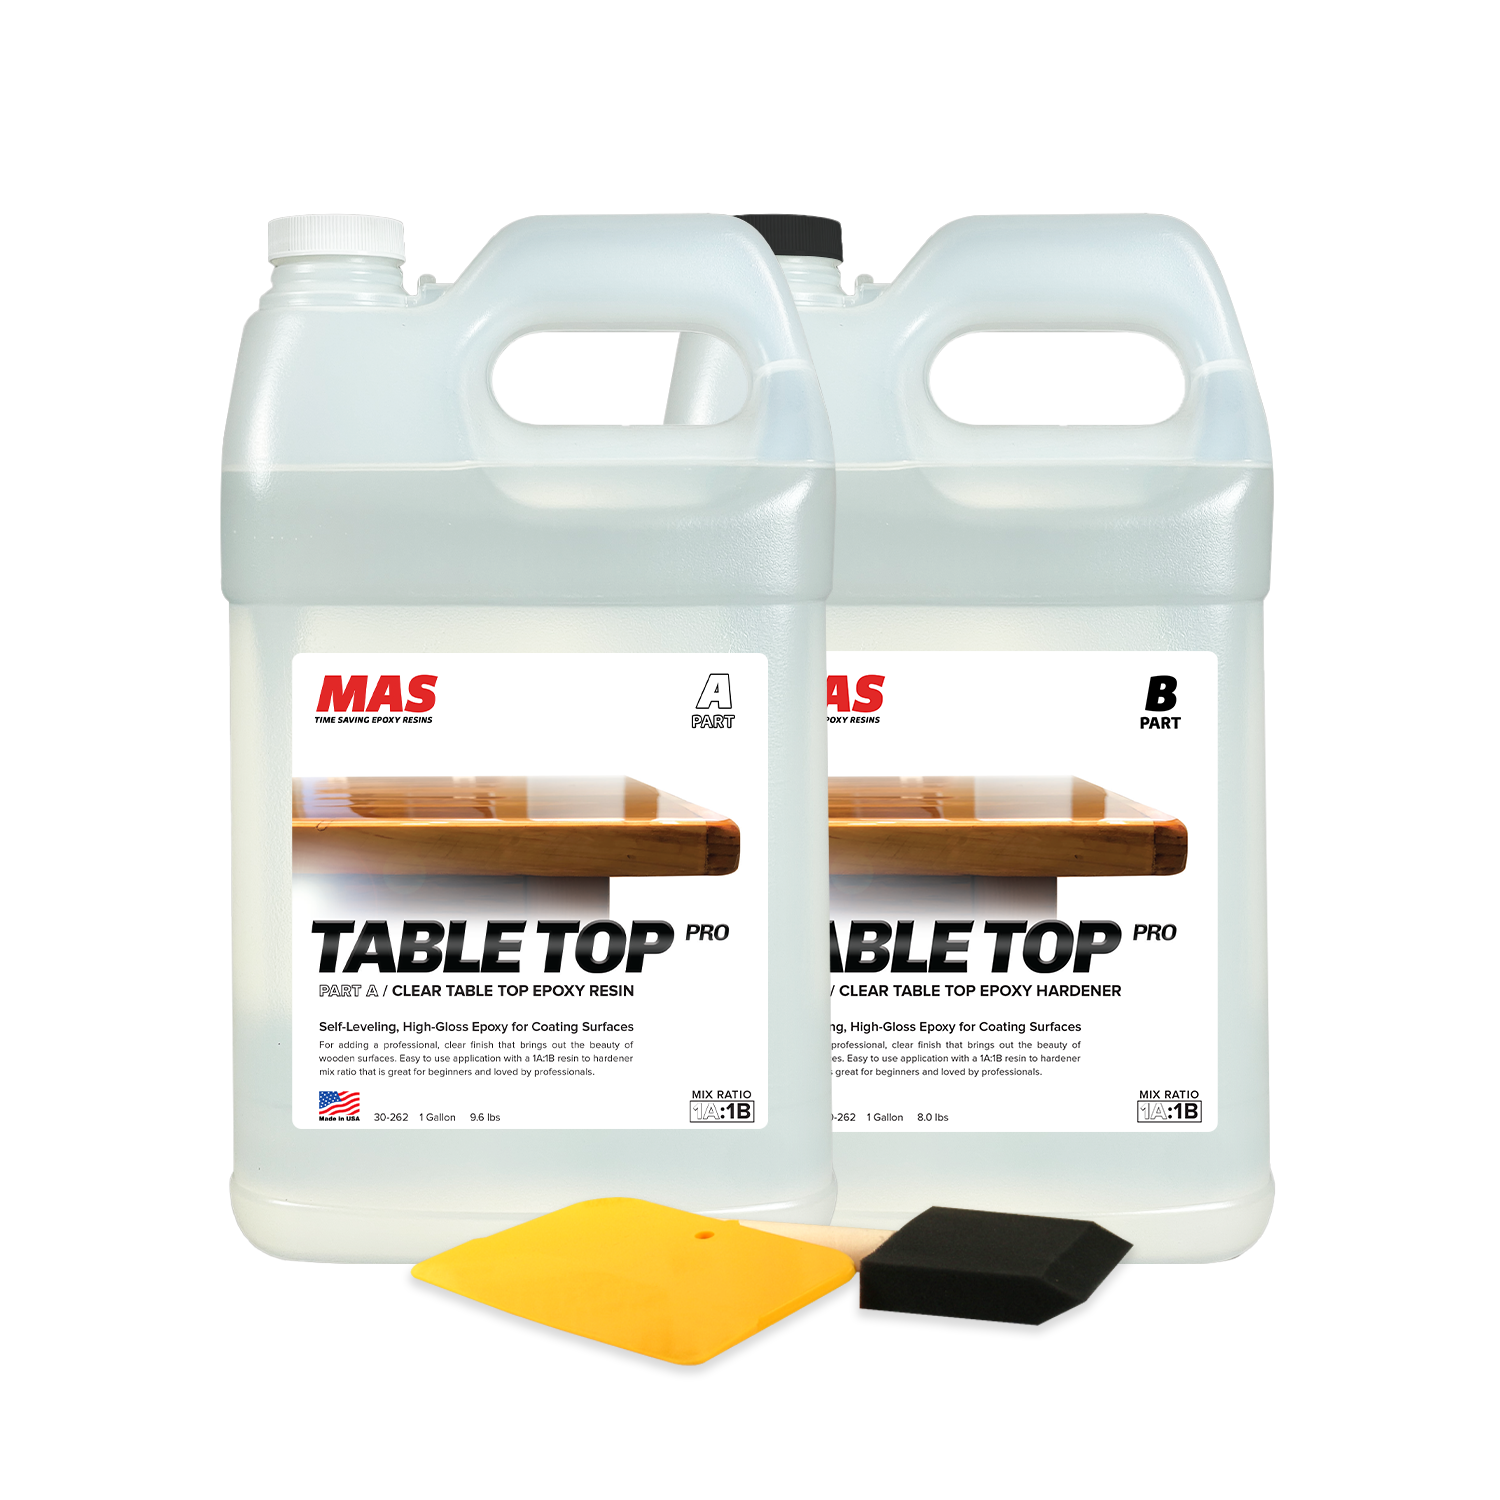 Can I use Table Top Pro epoxy for a flood coat on top of cured Art Pro epoxy? Are they compatible?